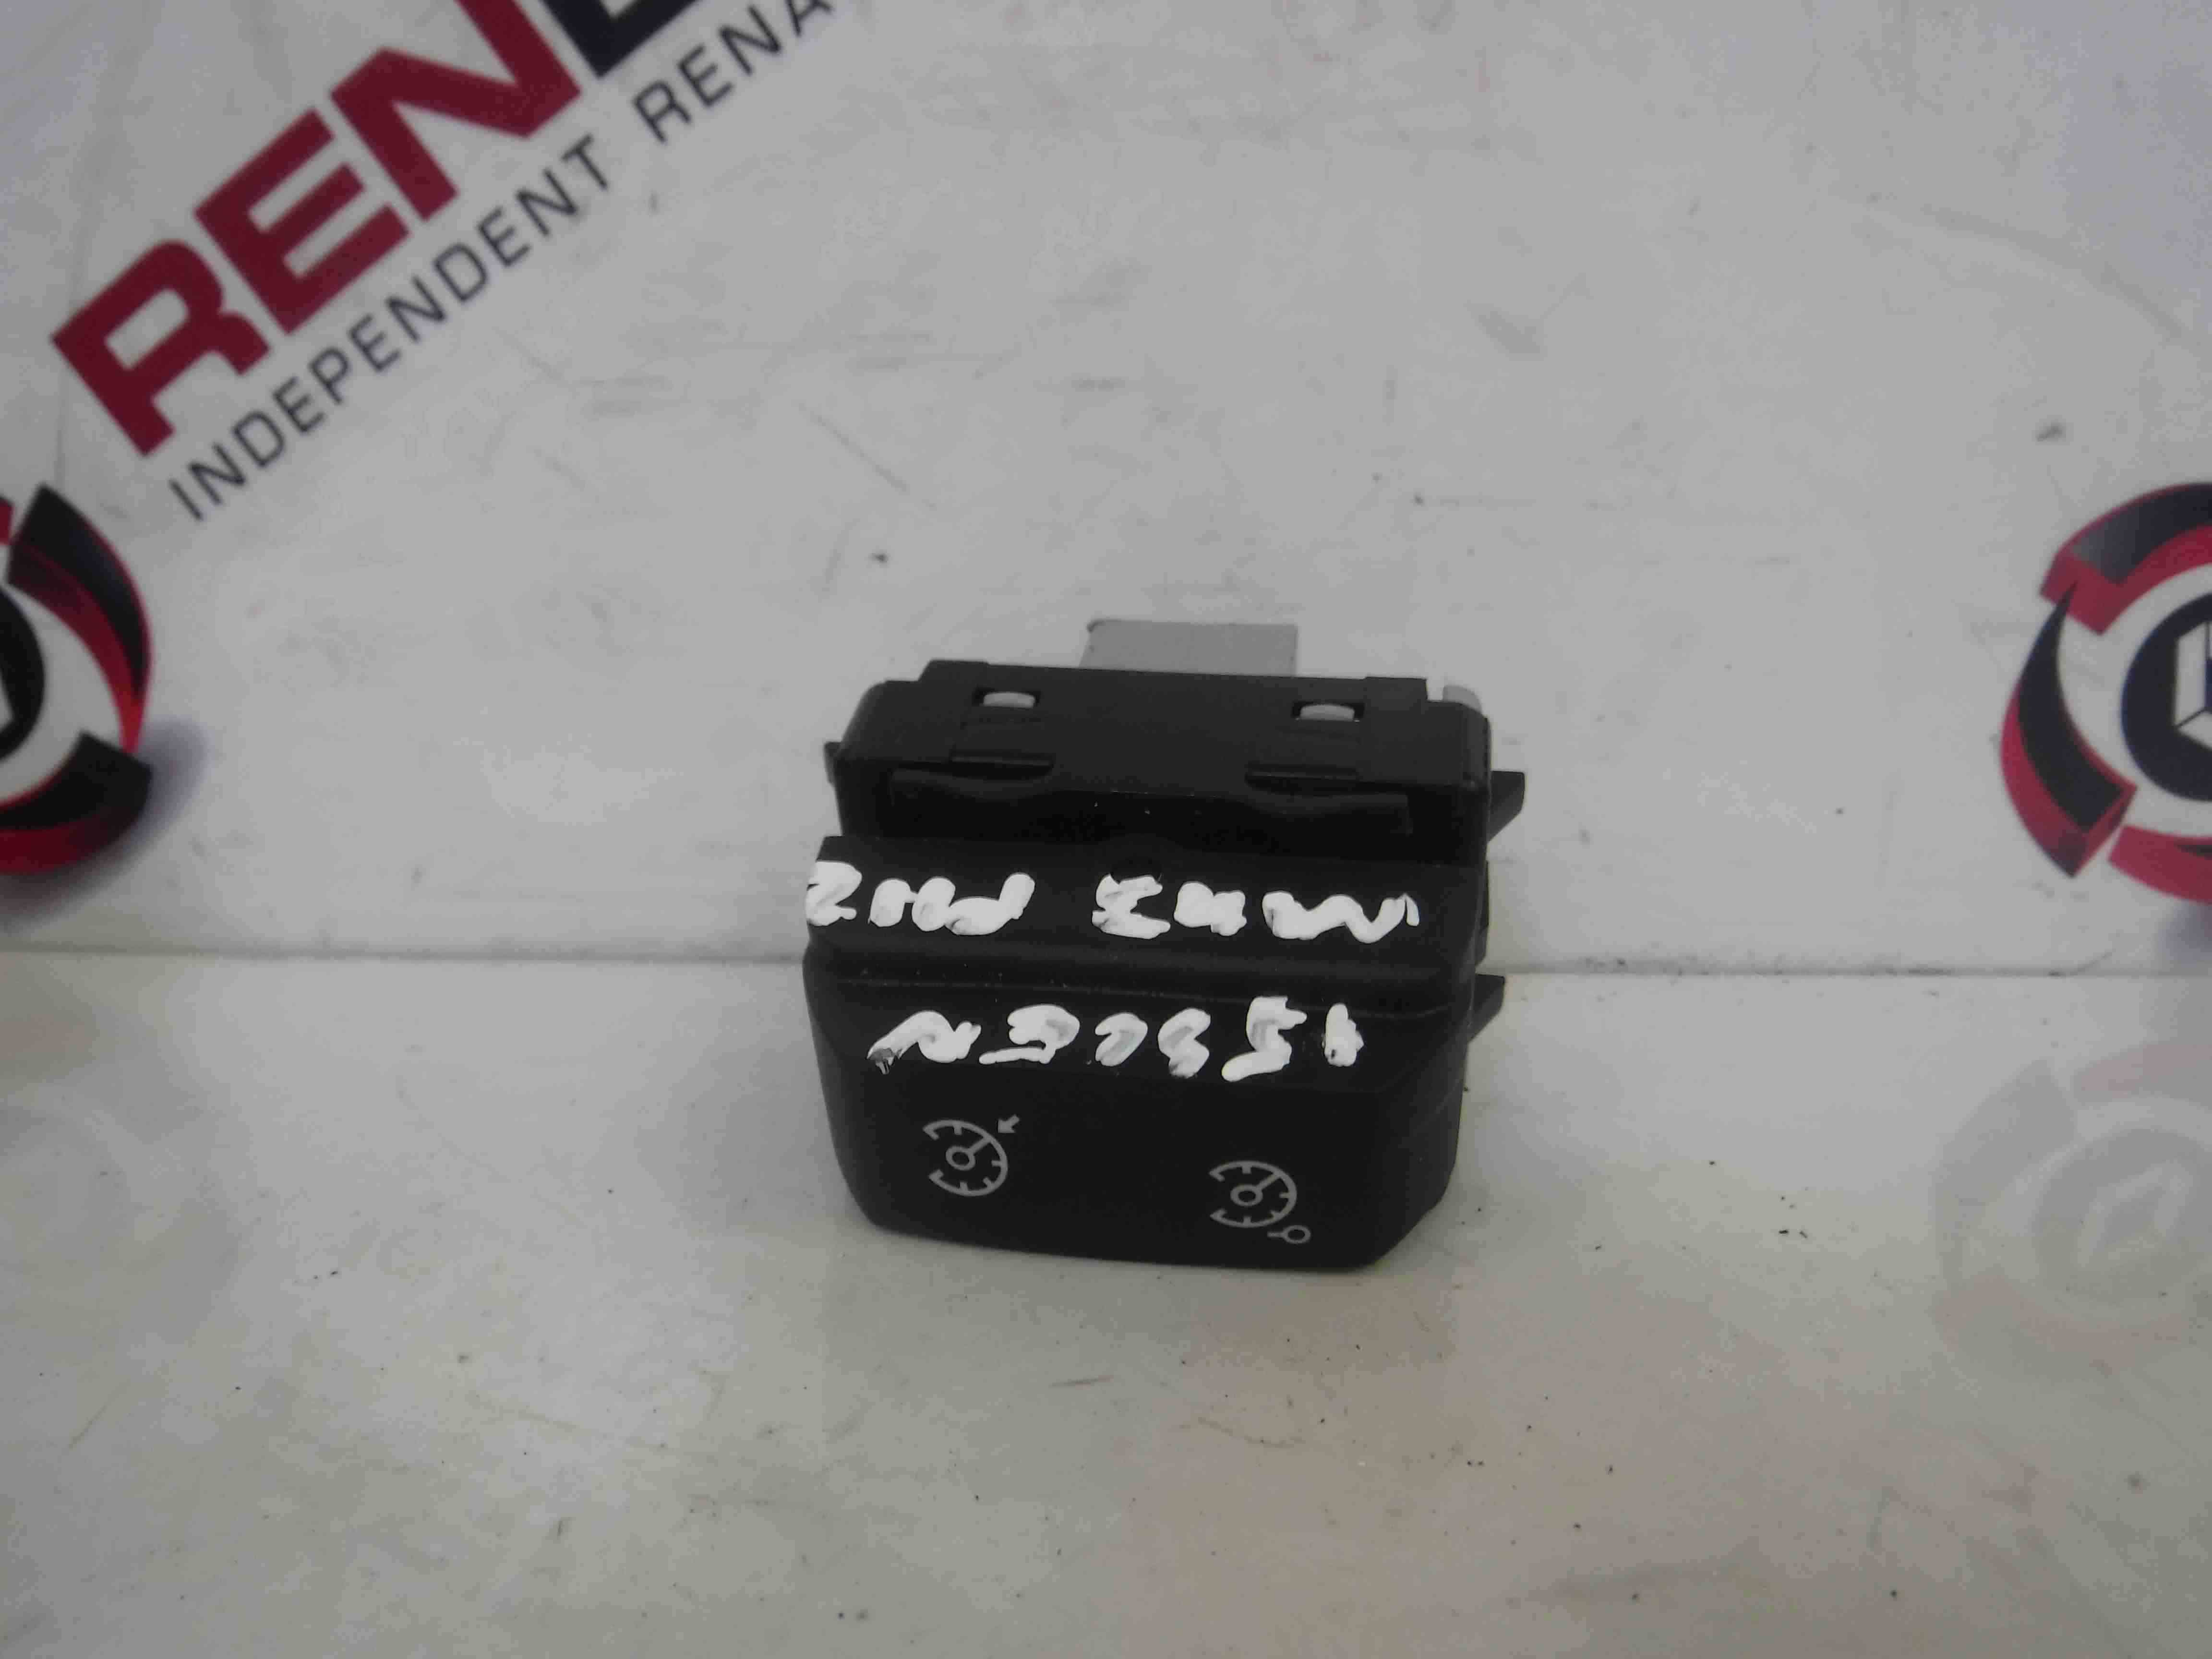 Renault Megane  Scenic MK3 2009-2016 Cruise Control Button Switch 255500002r